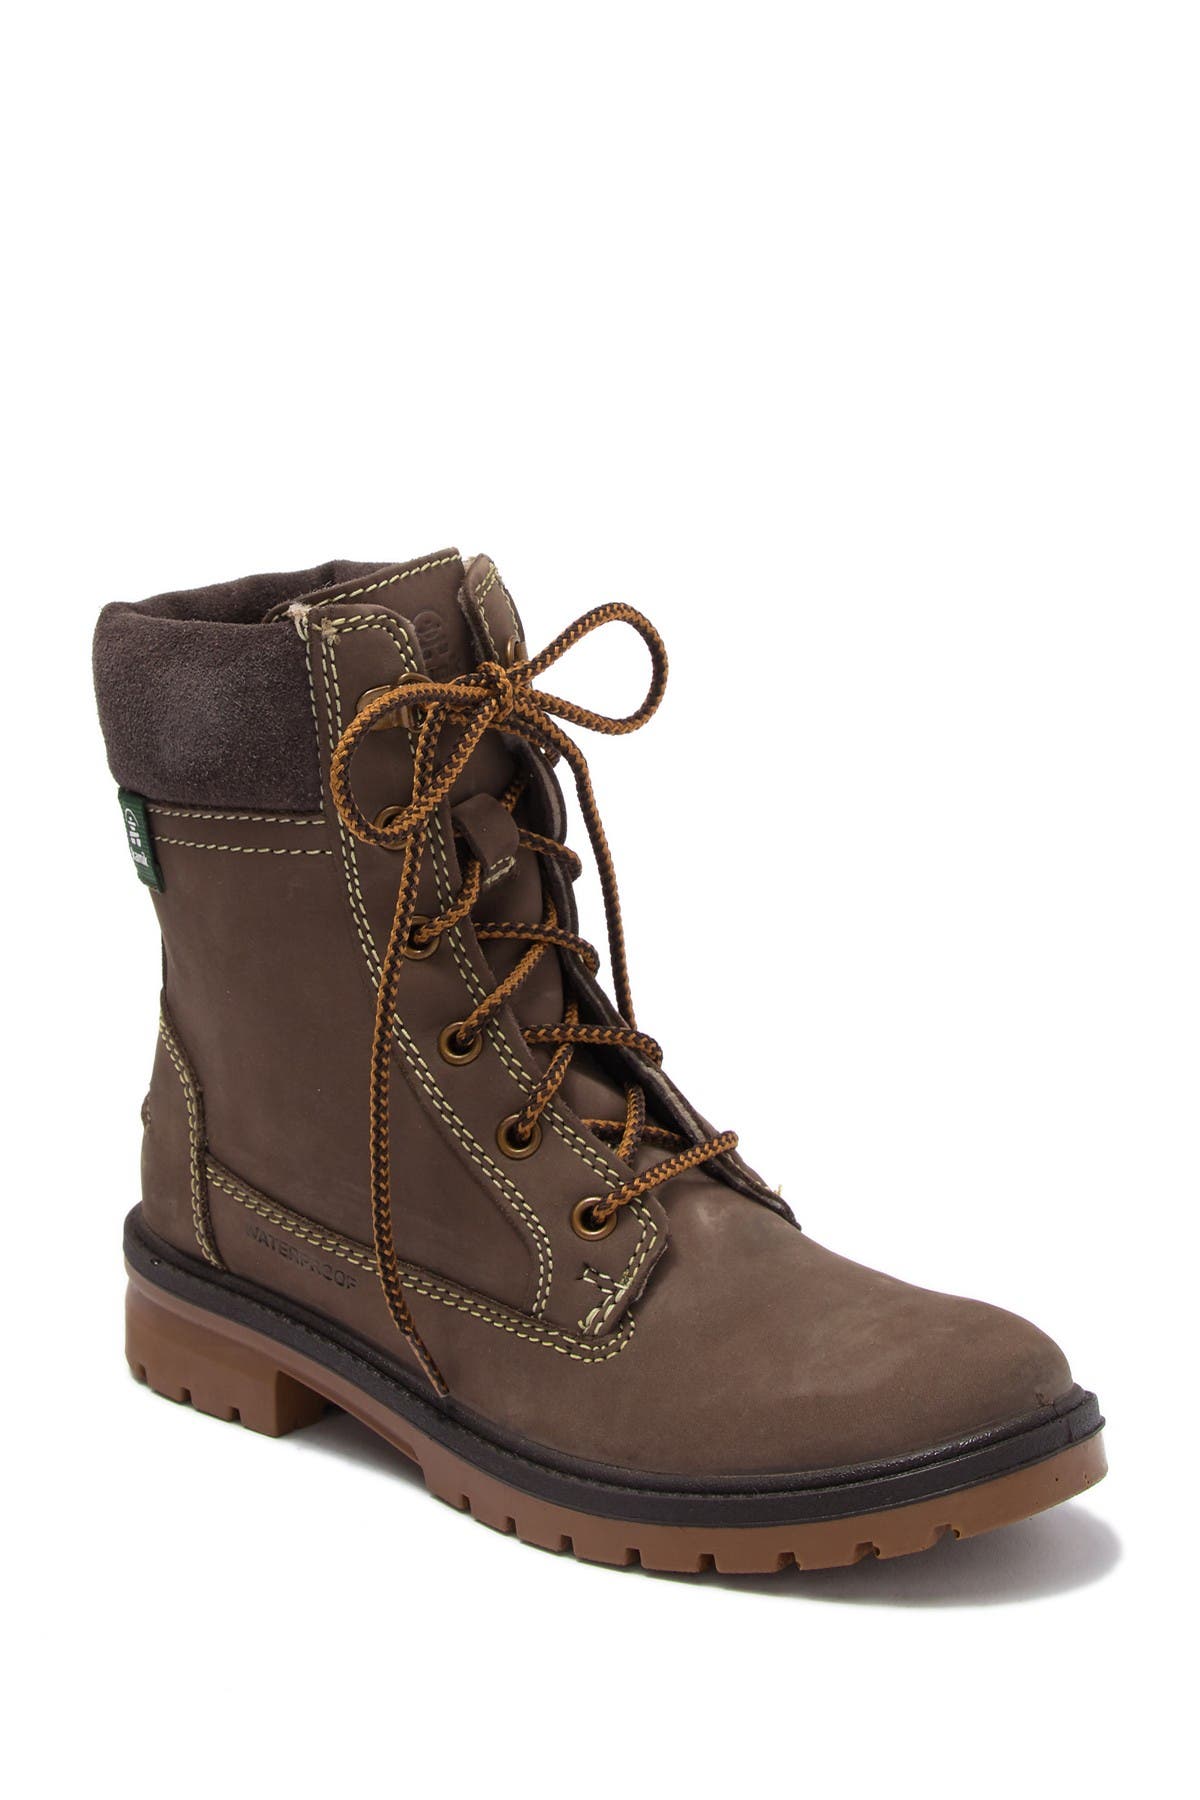 Kamik | Rogue 6 Leather Lace-Up Boot 